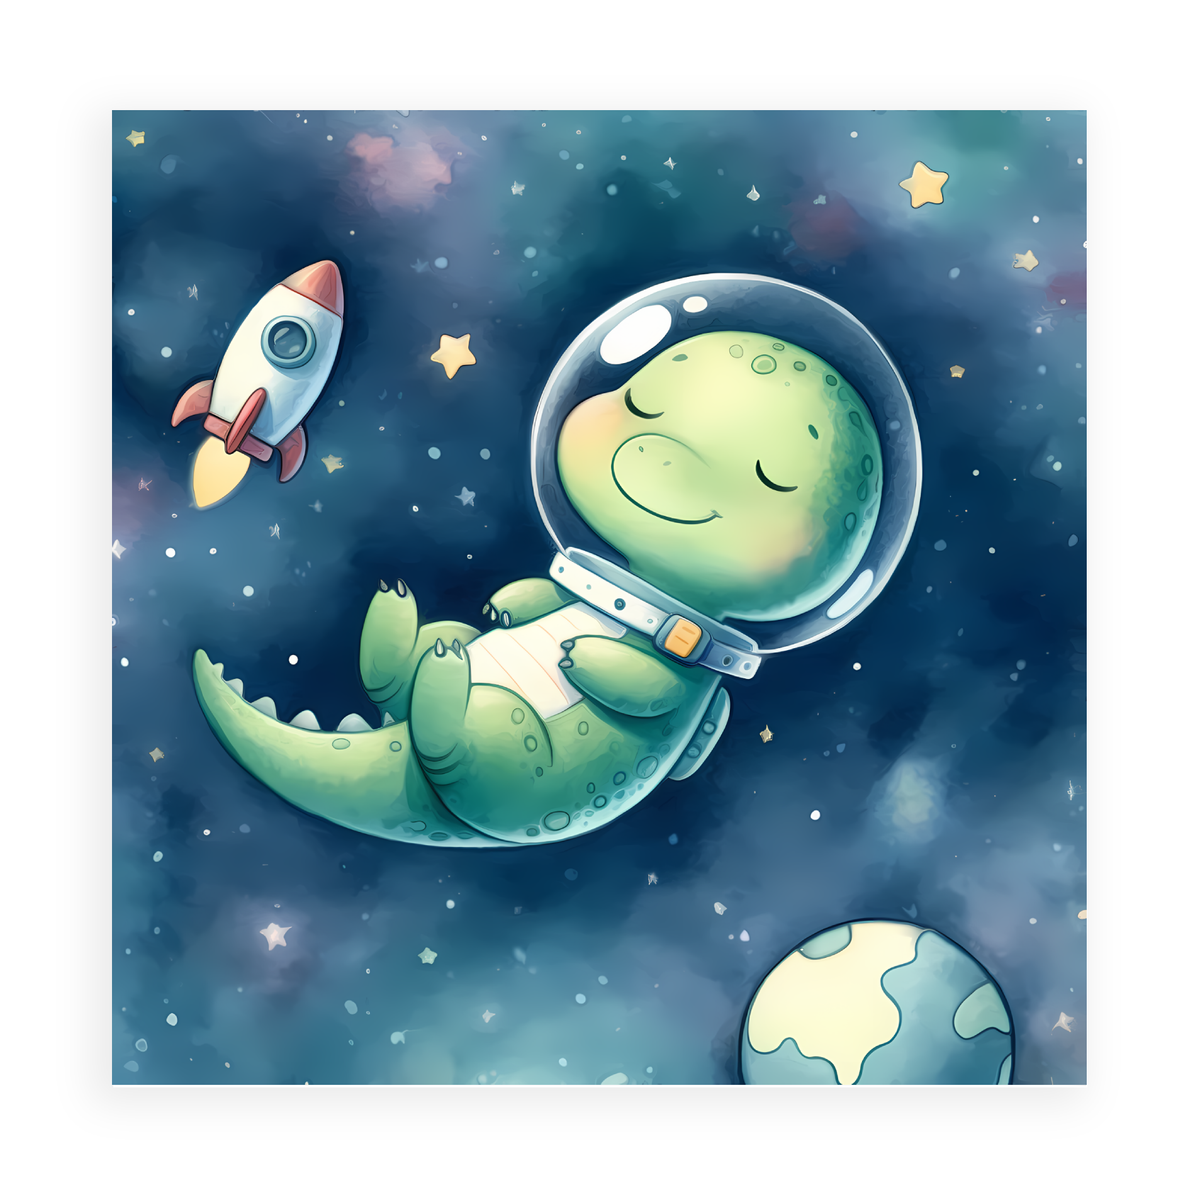 Cosmic Cuddles - Space Canvas Art for Kids Room or Play Area